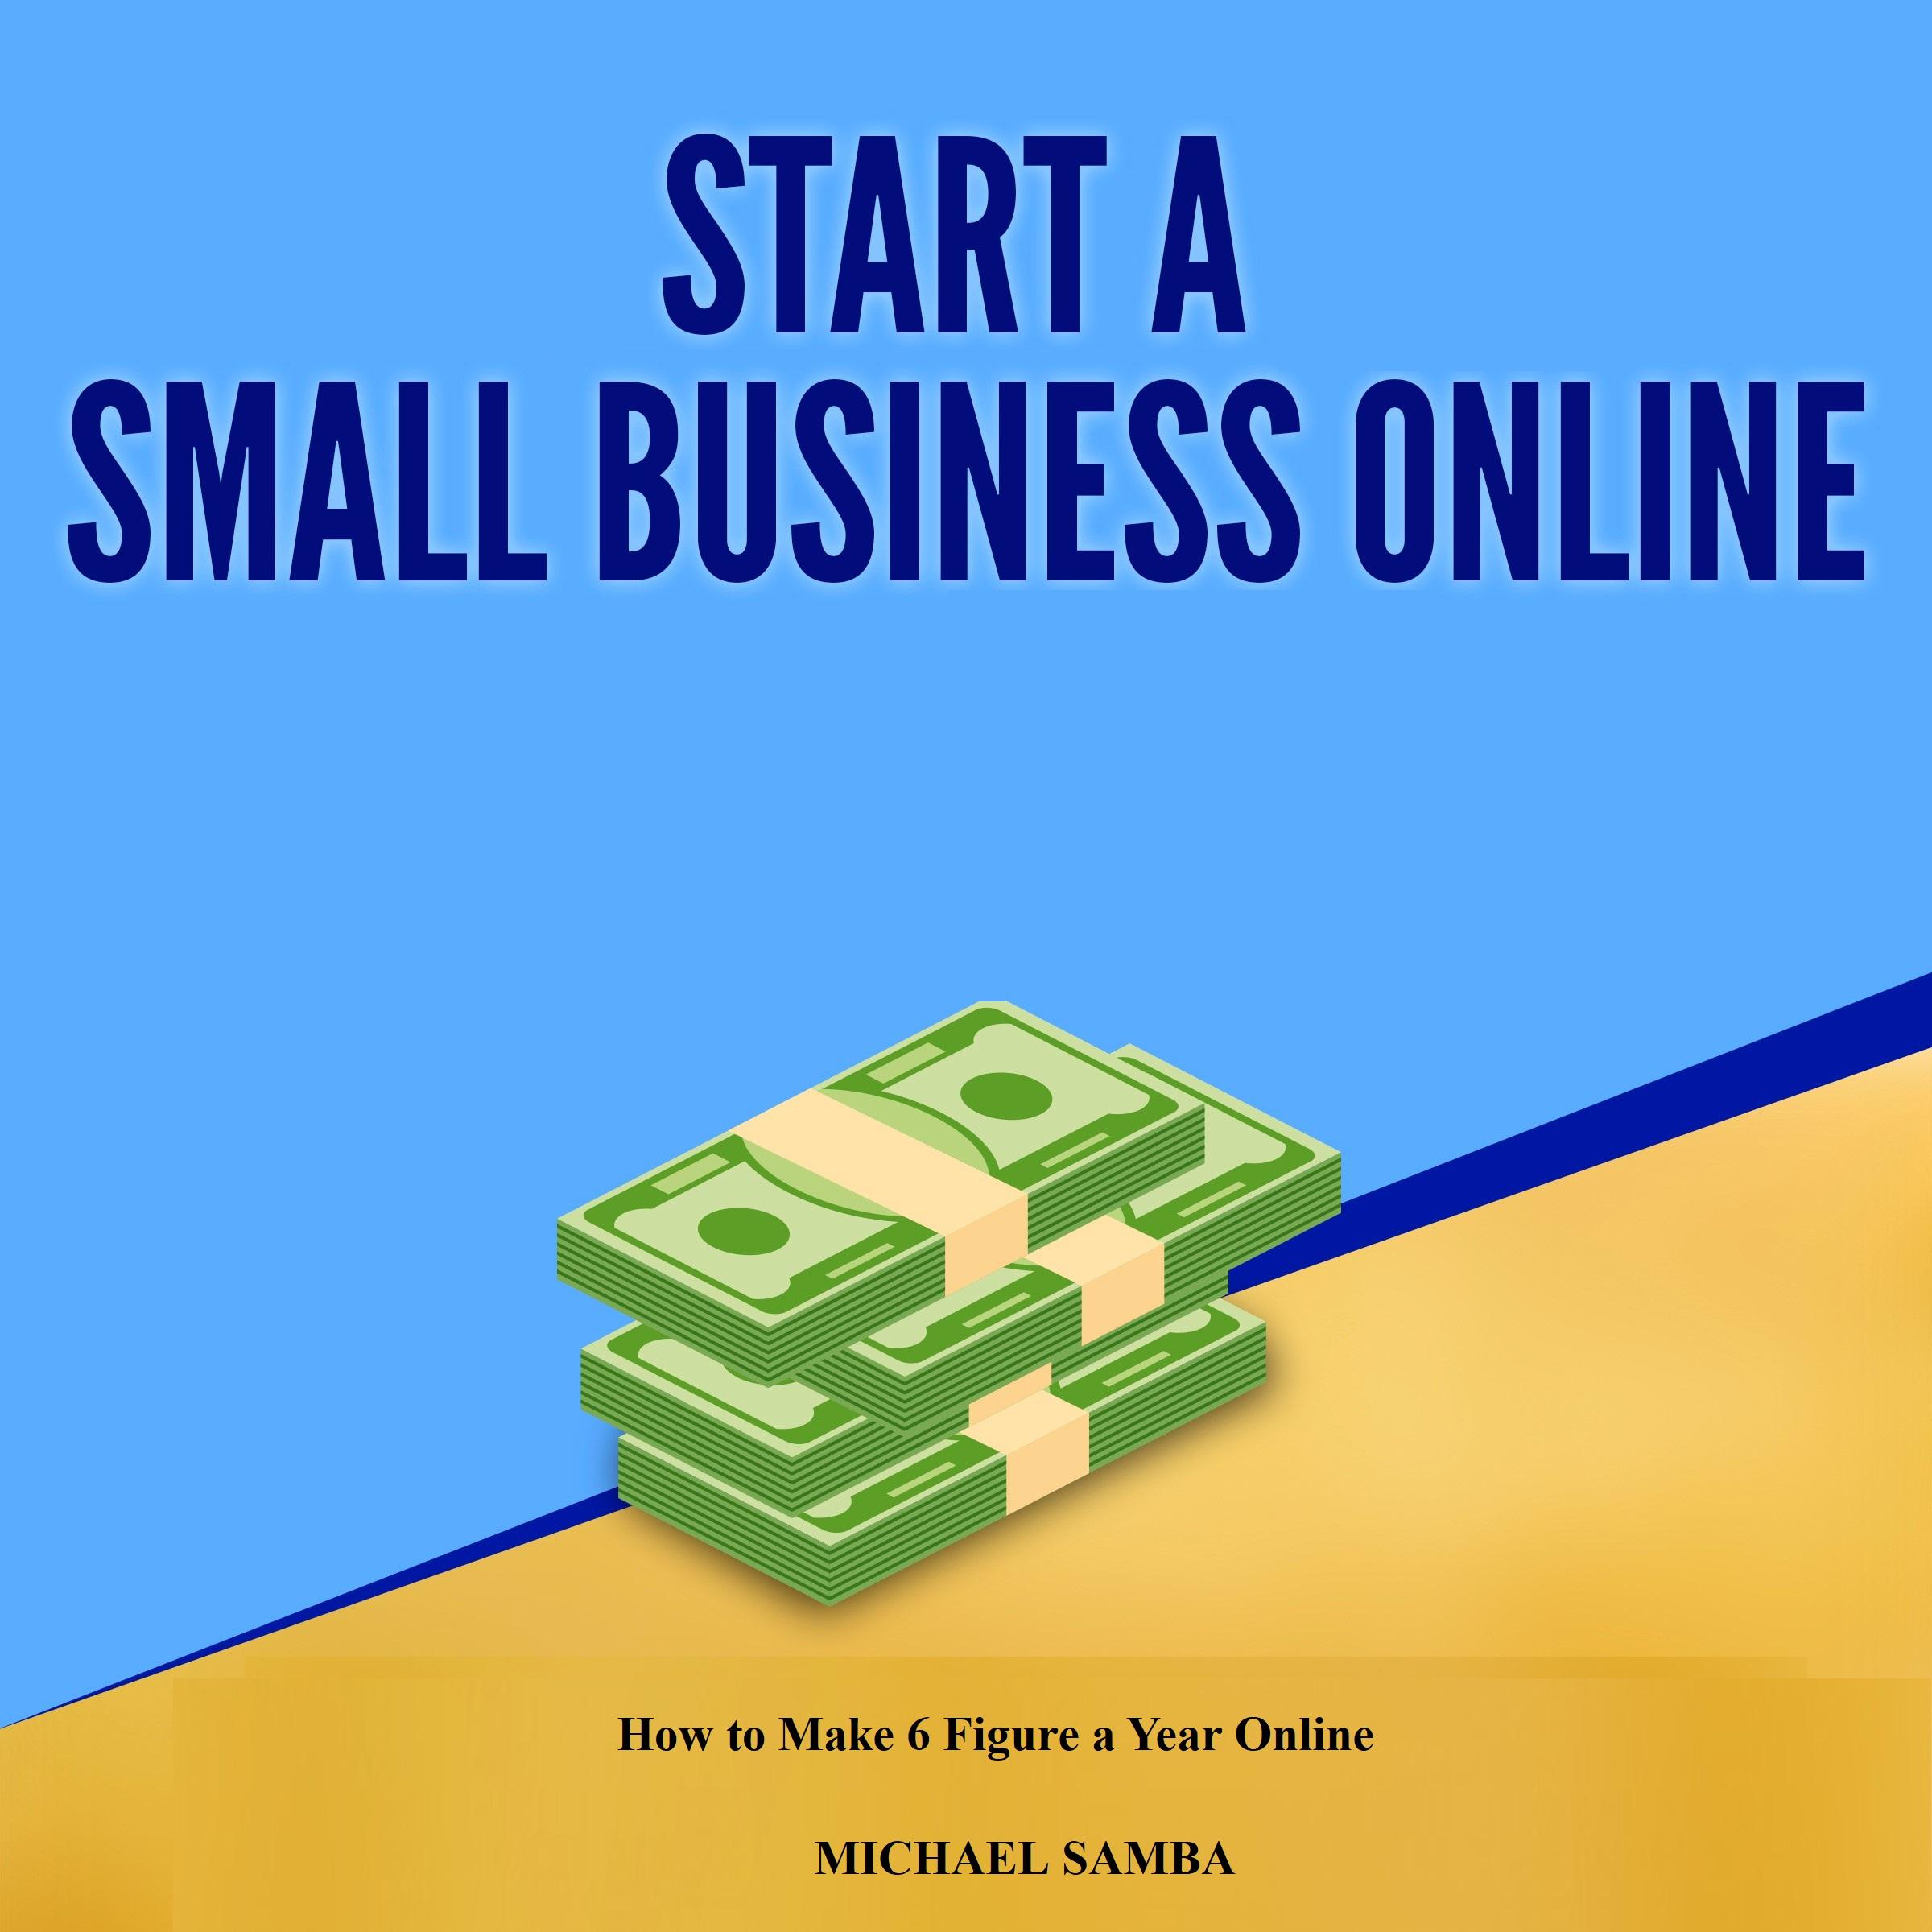 Start a Small Business Online:  How to Make 6 Figure a Year Online